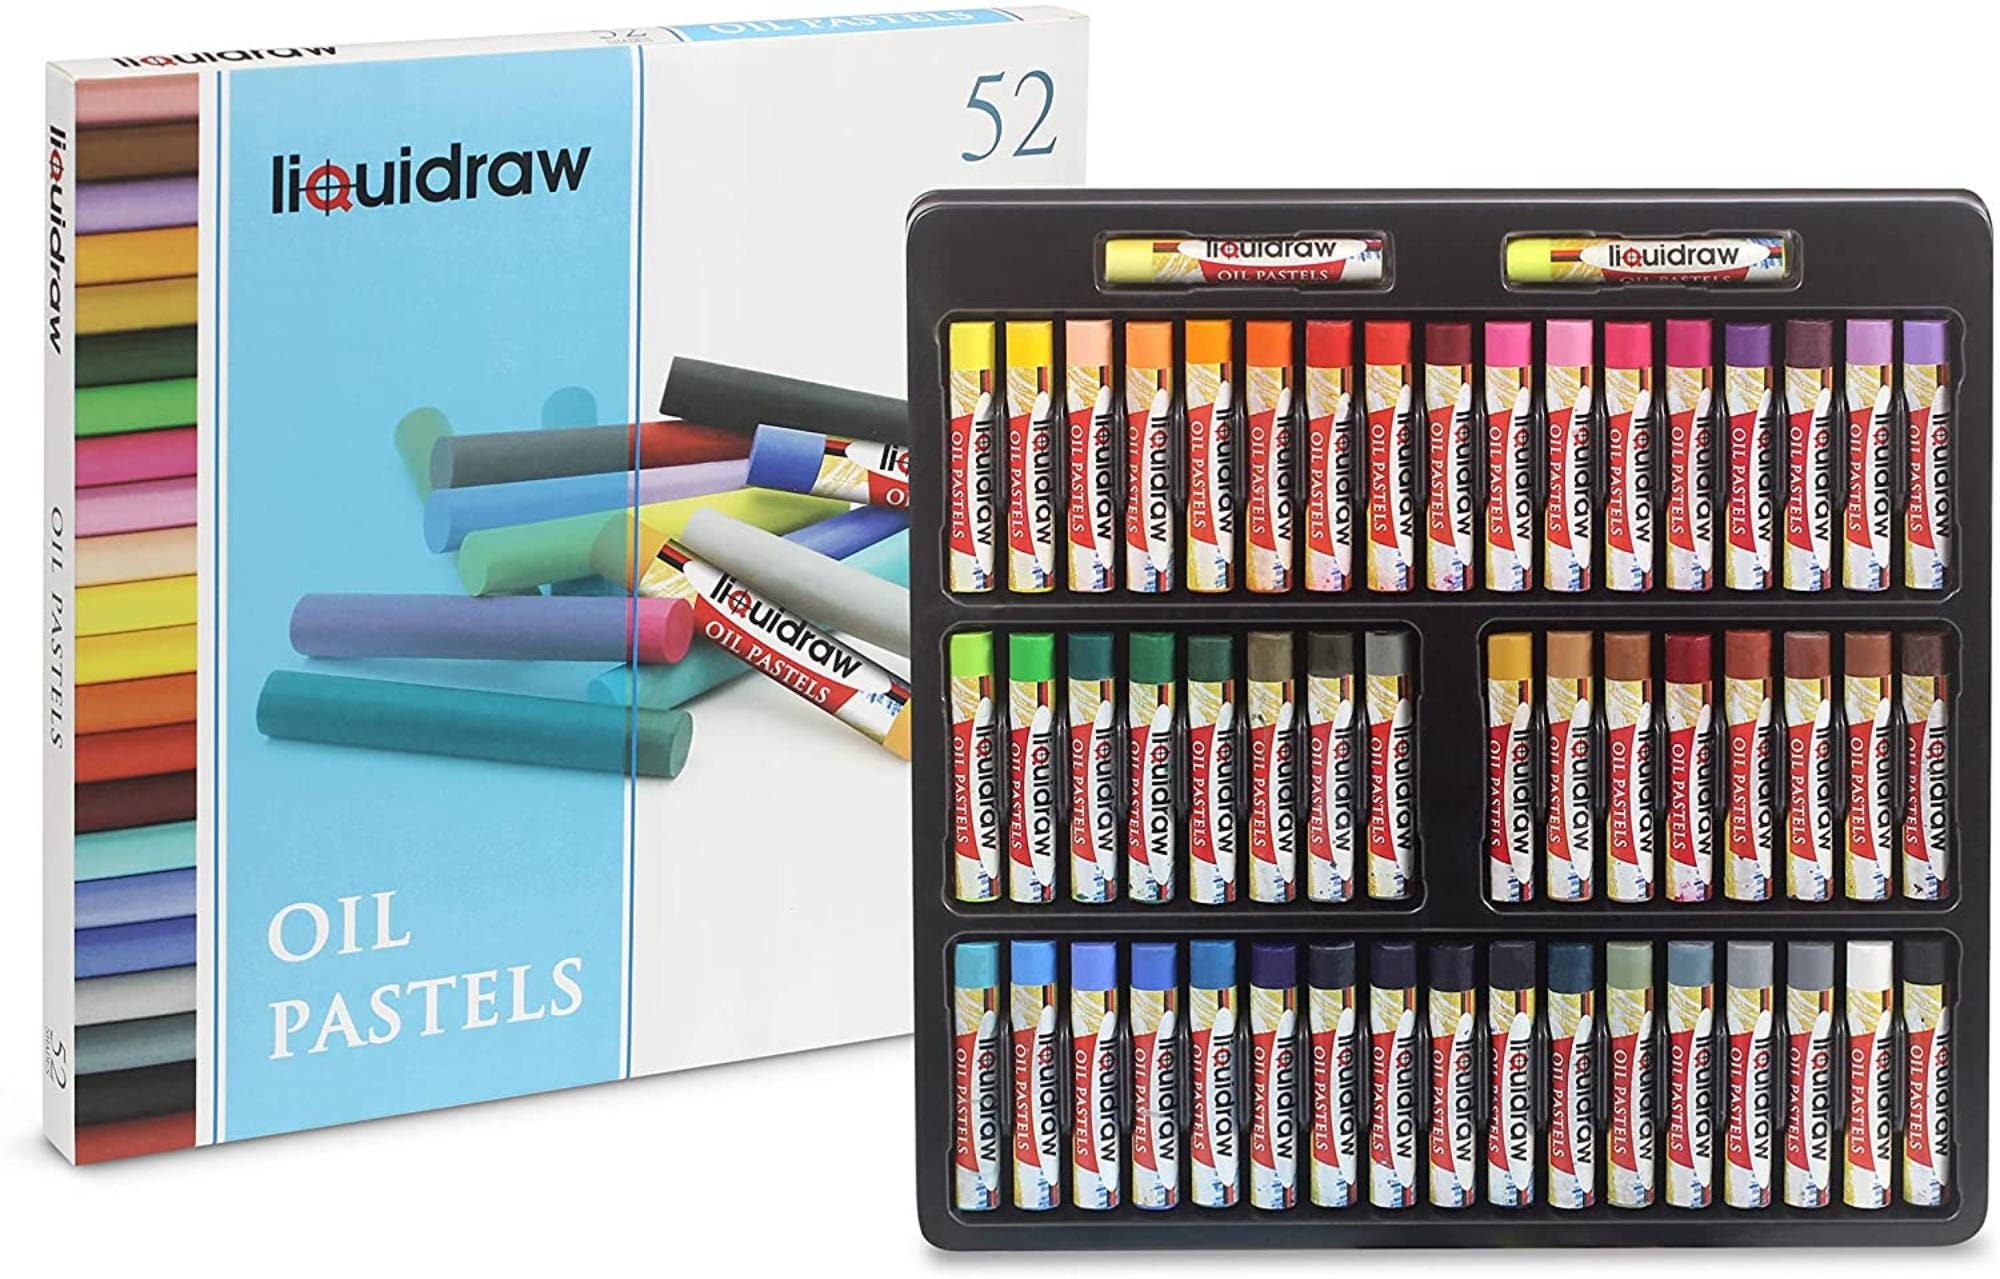  Liquidraw Oil Pastels Super Soft Water Soluble For